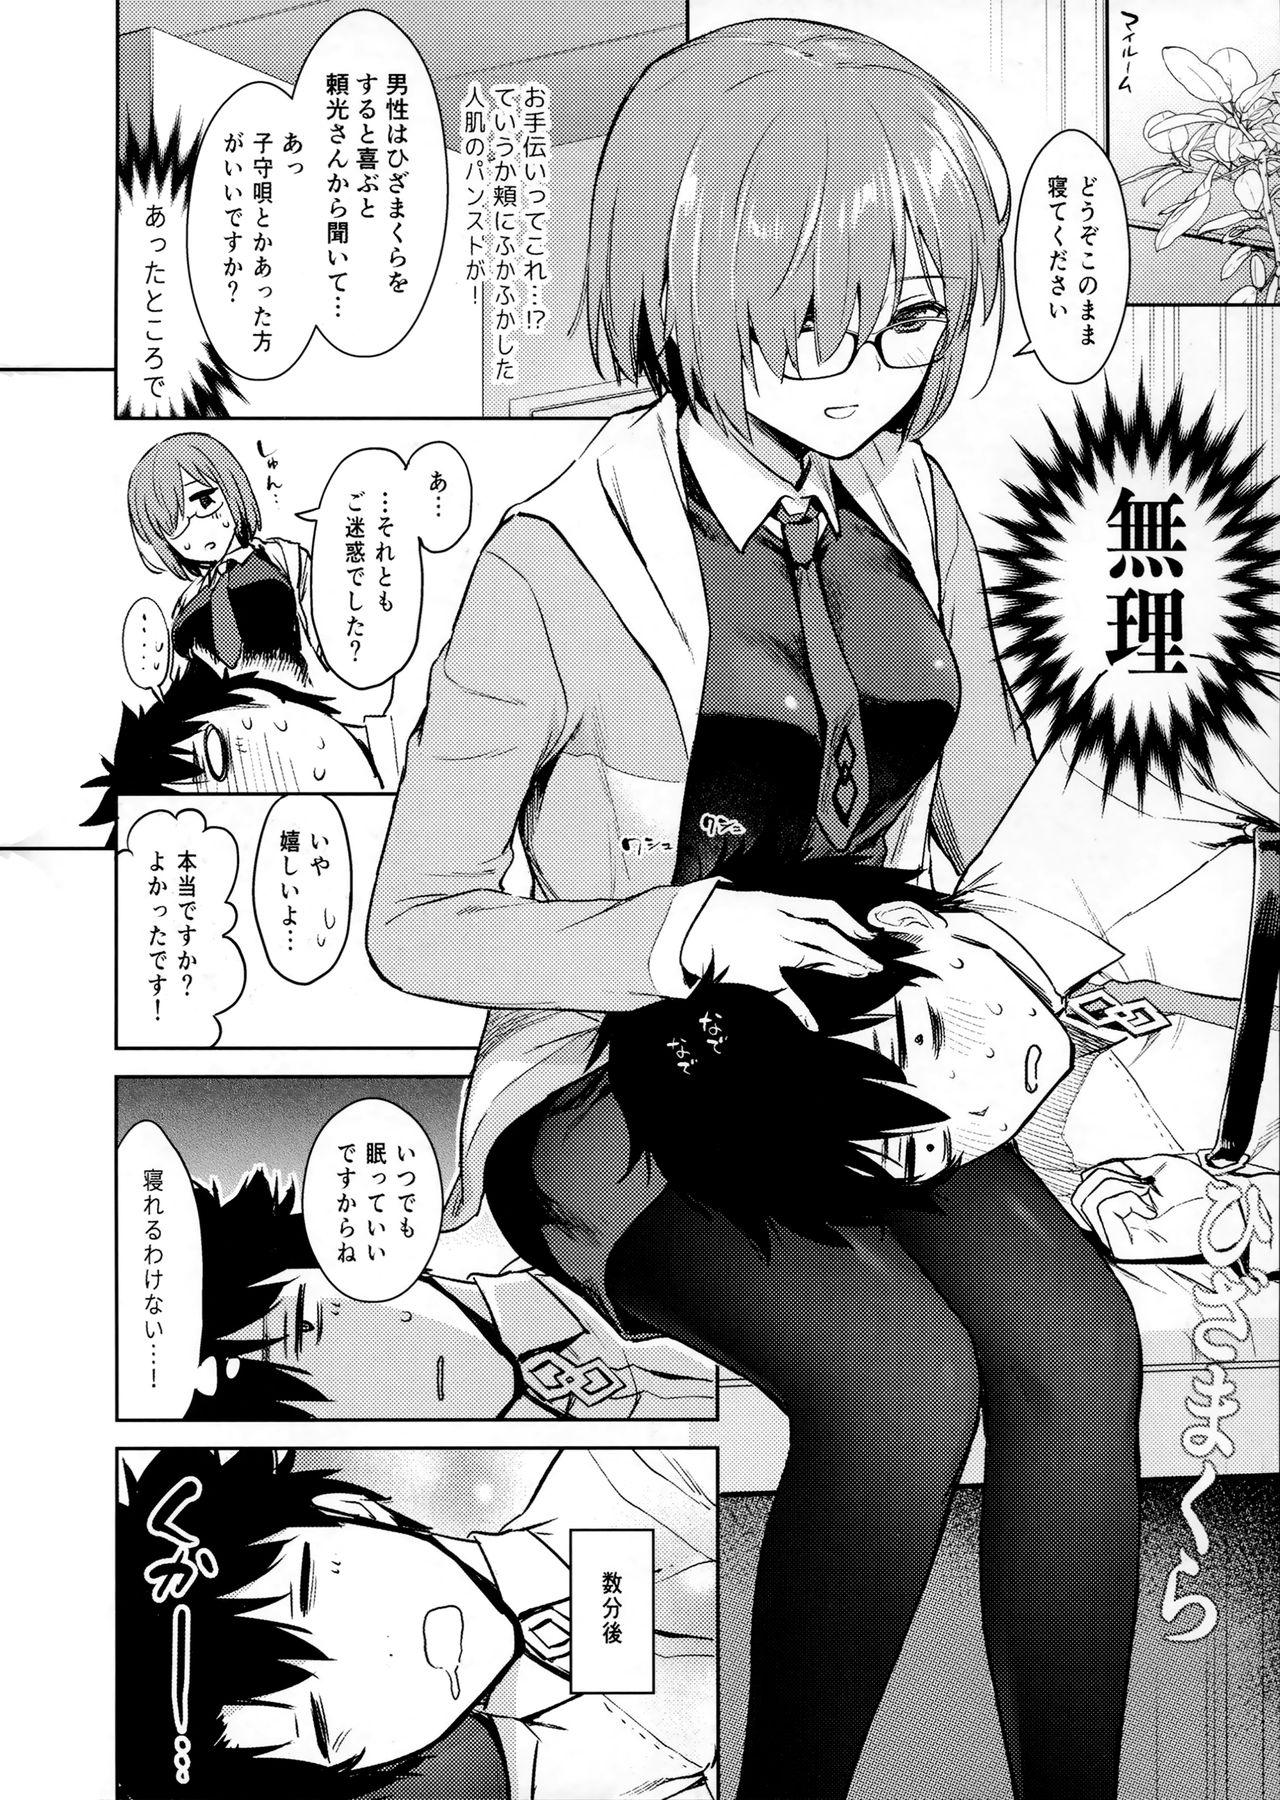 Pawg MASH, HORNY, MASH - Fate grand order Tiny Girl - Page 3